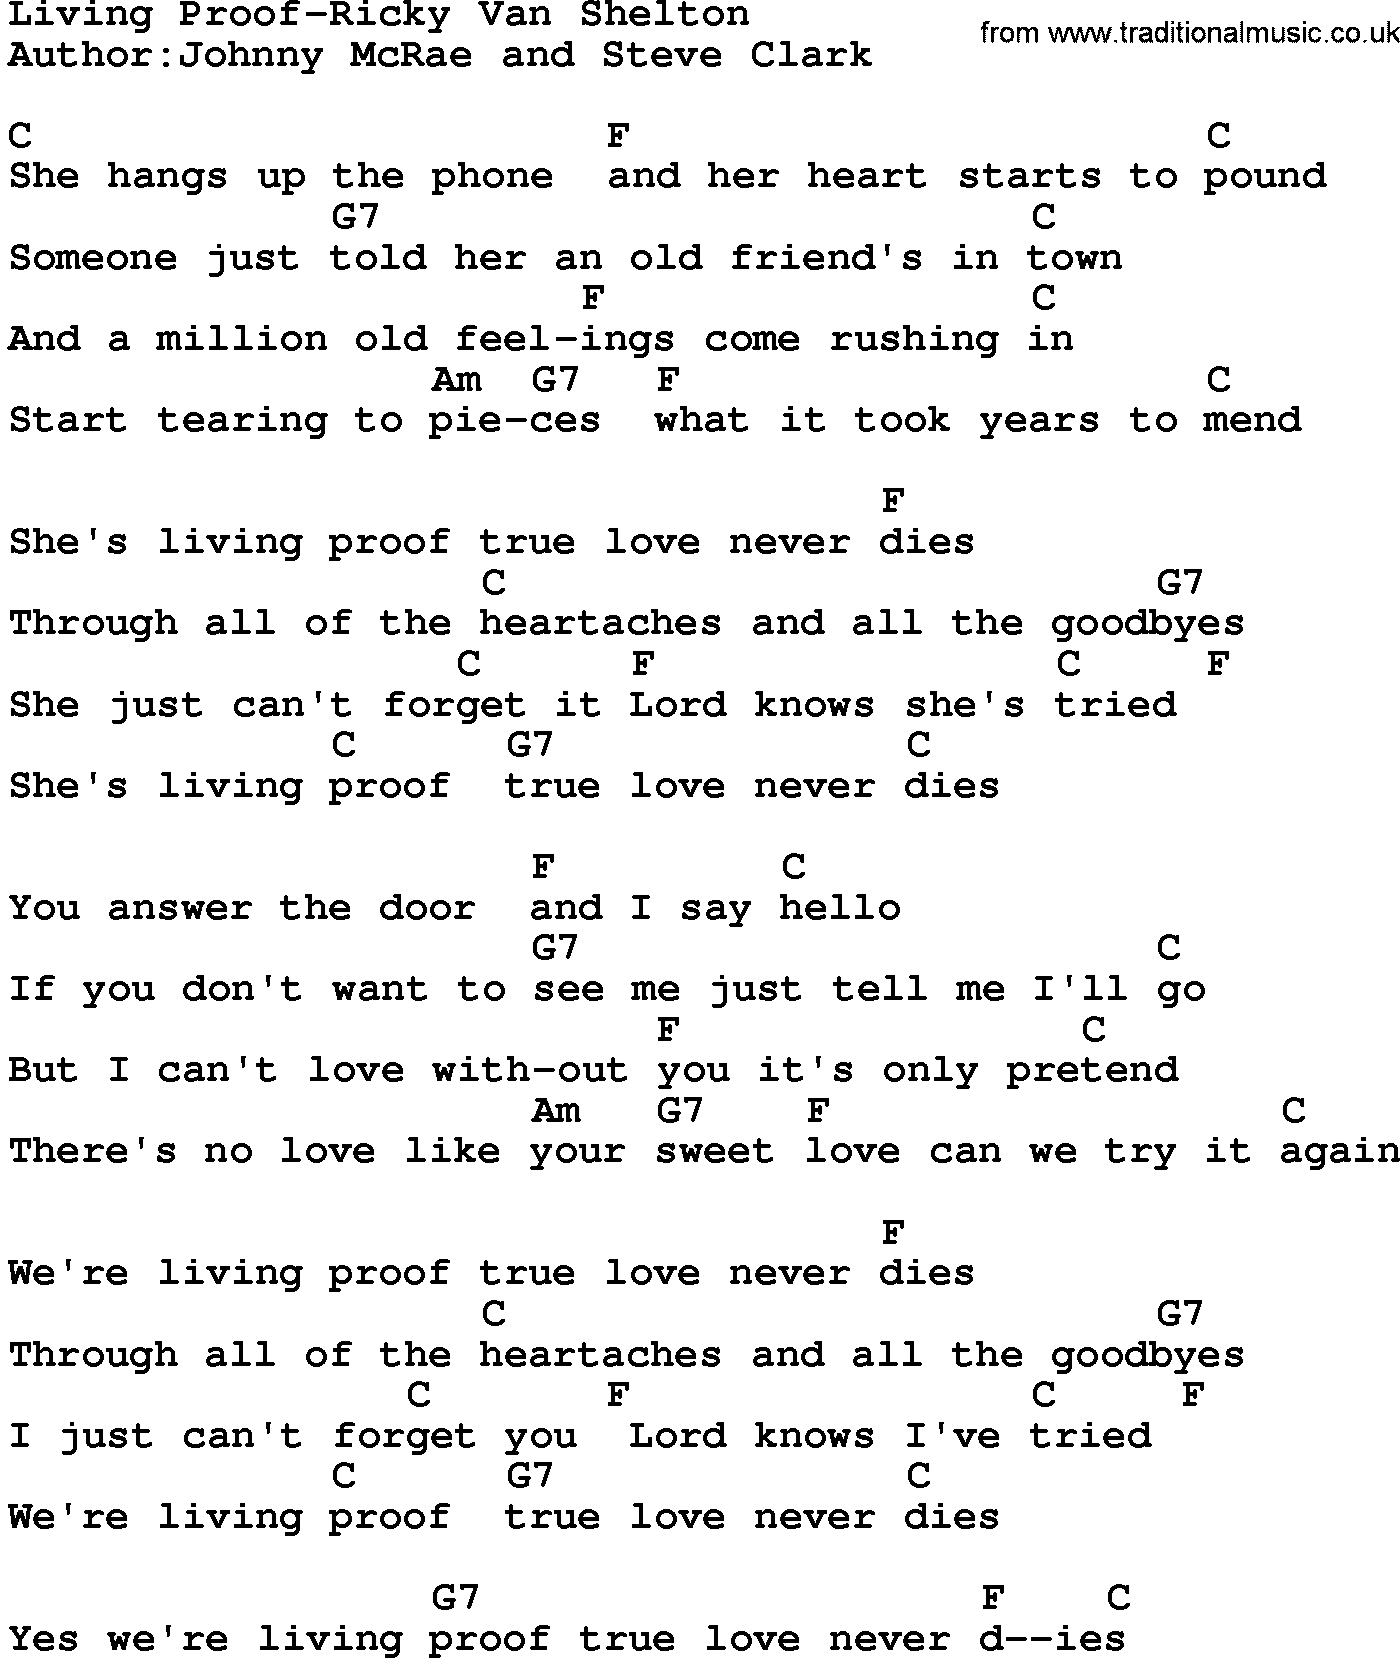 Country music song: Living Proof-Ricky Van Shelton lyrics and chords